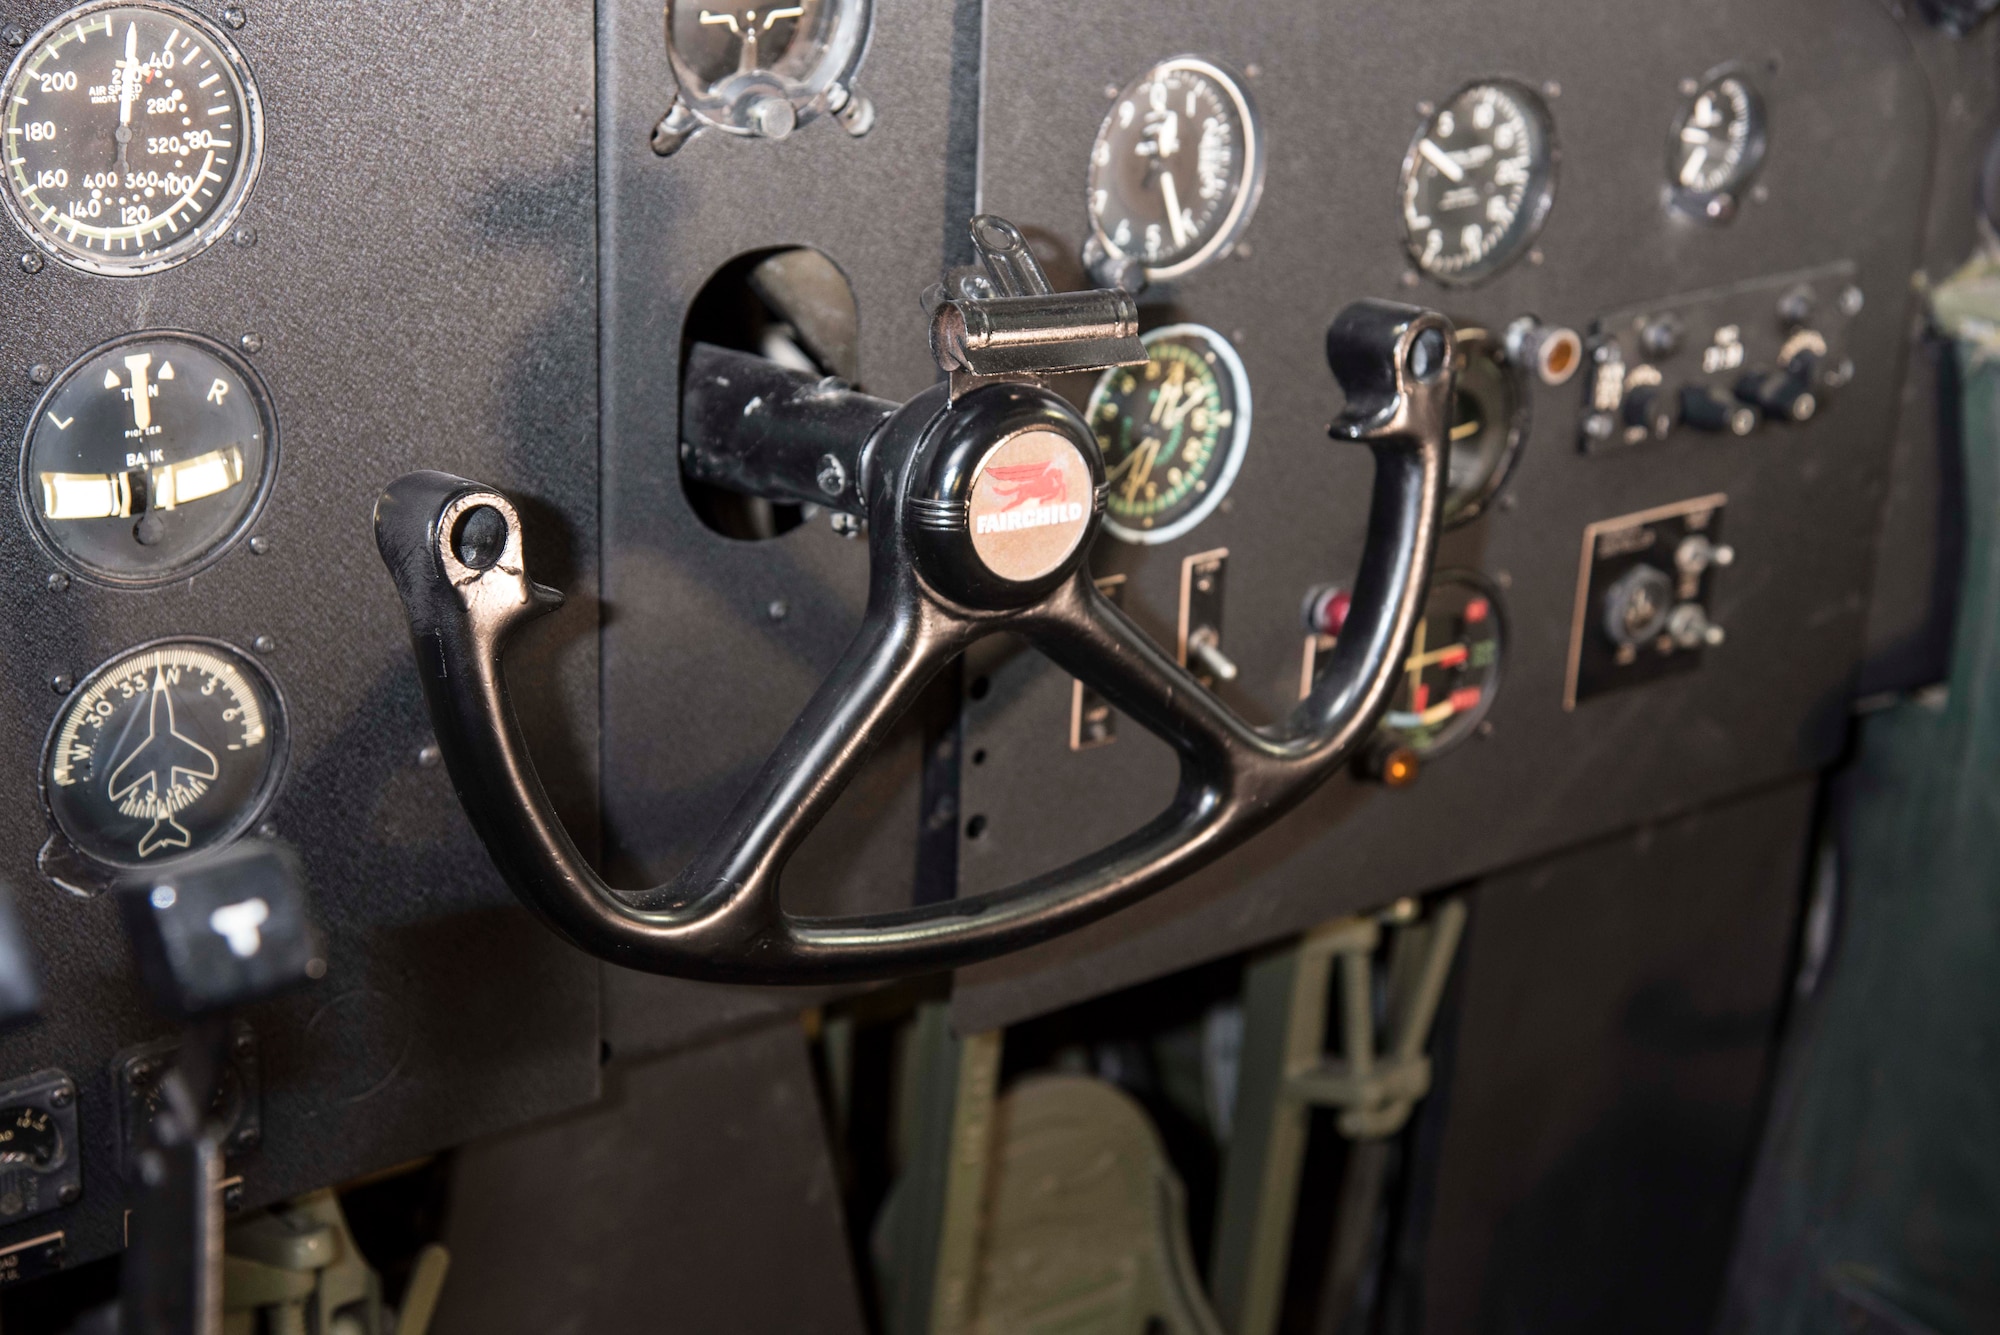 DAYTON, Ohio - Fairchild C-82 cockpit at the National Museum of the U.S. Air Force. (U.S. Air Force photo)
